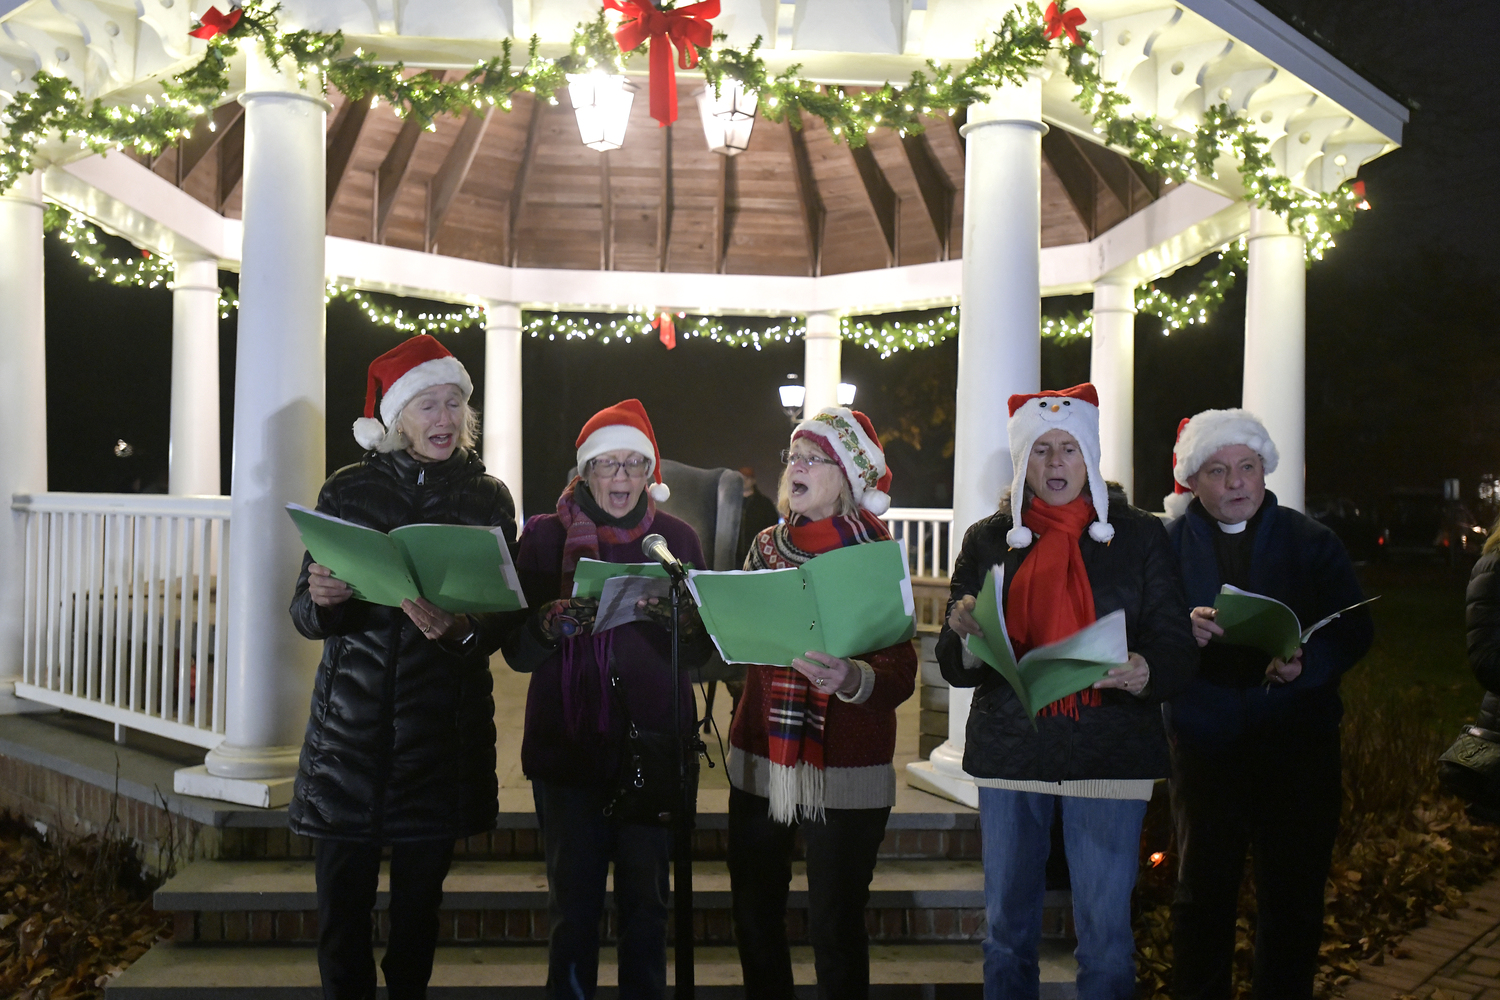 Carolers perform holiday songs at the gazebo on the village green on Saturday evening.